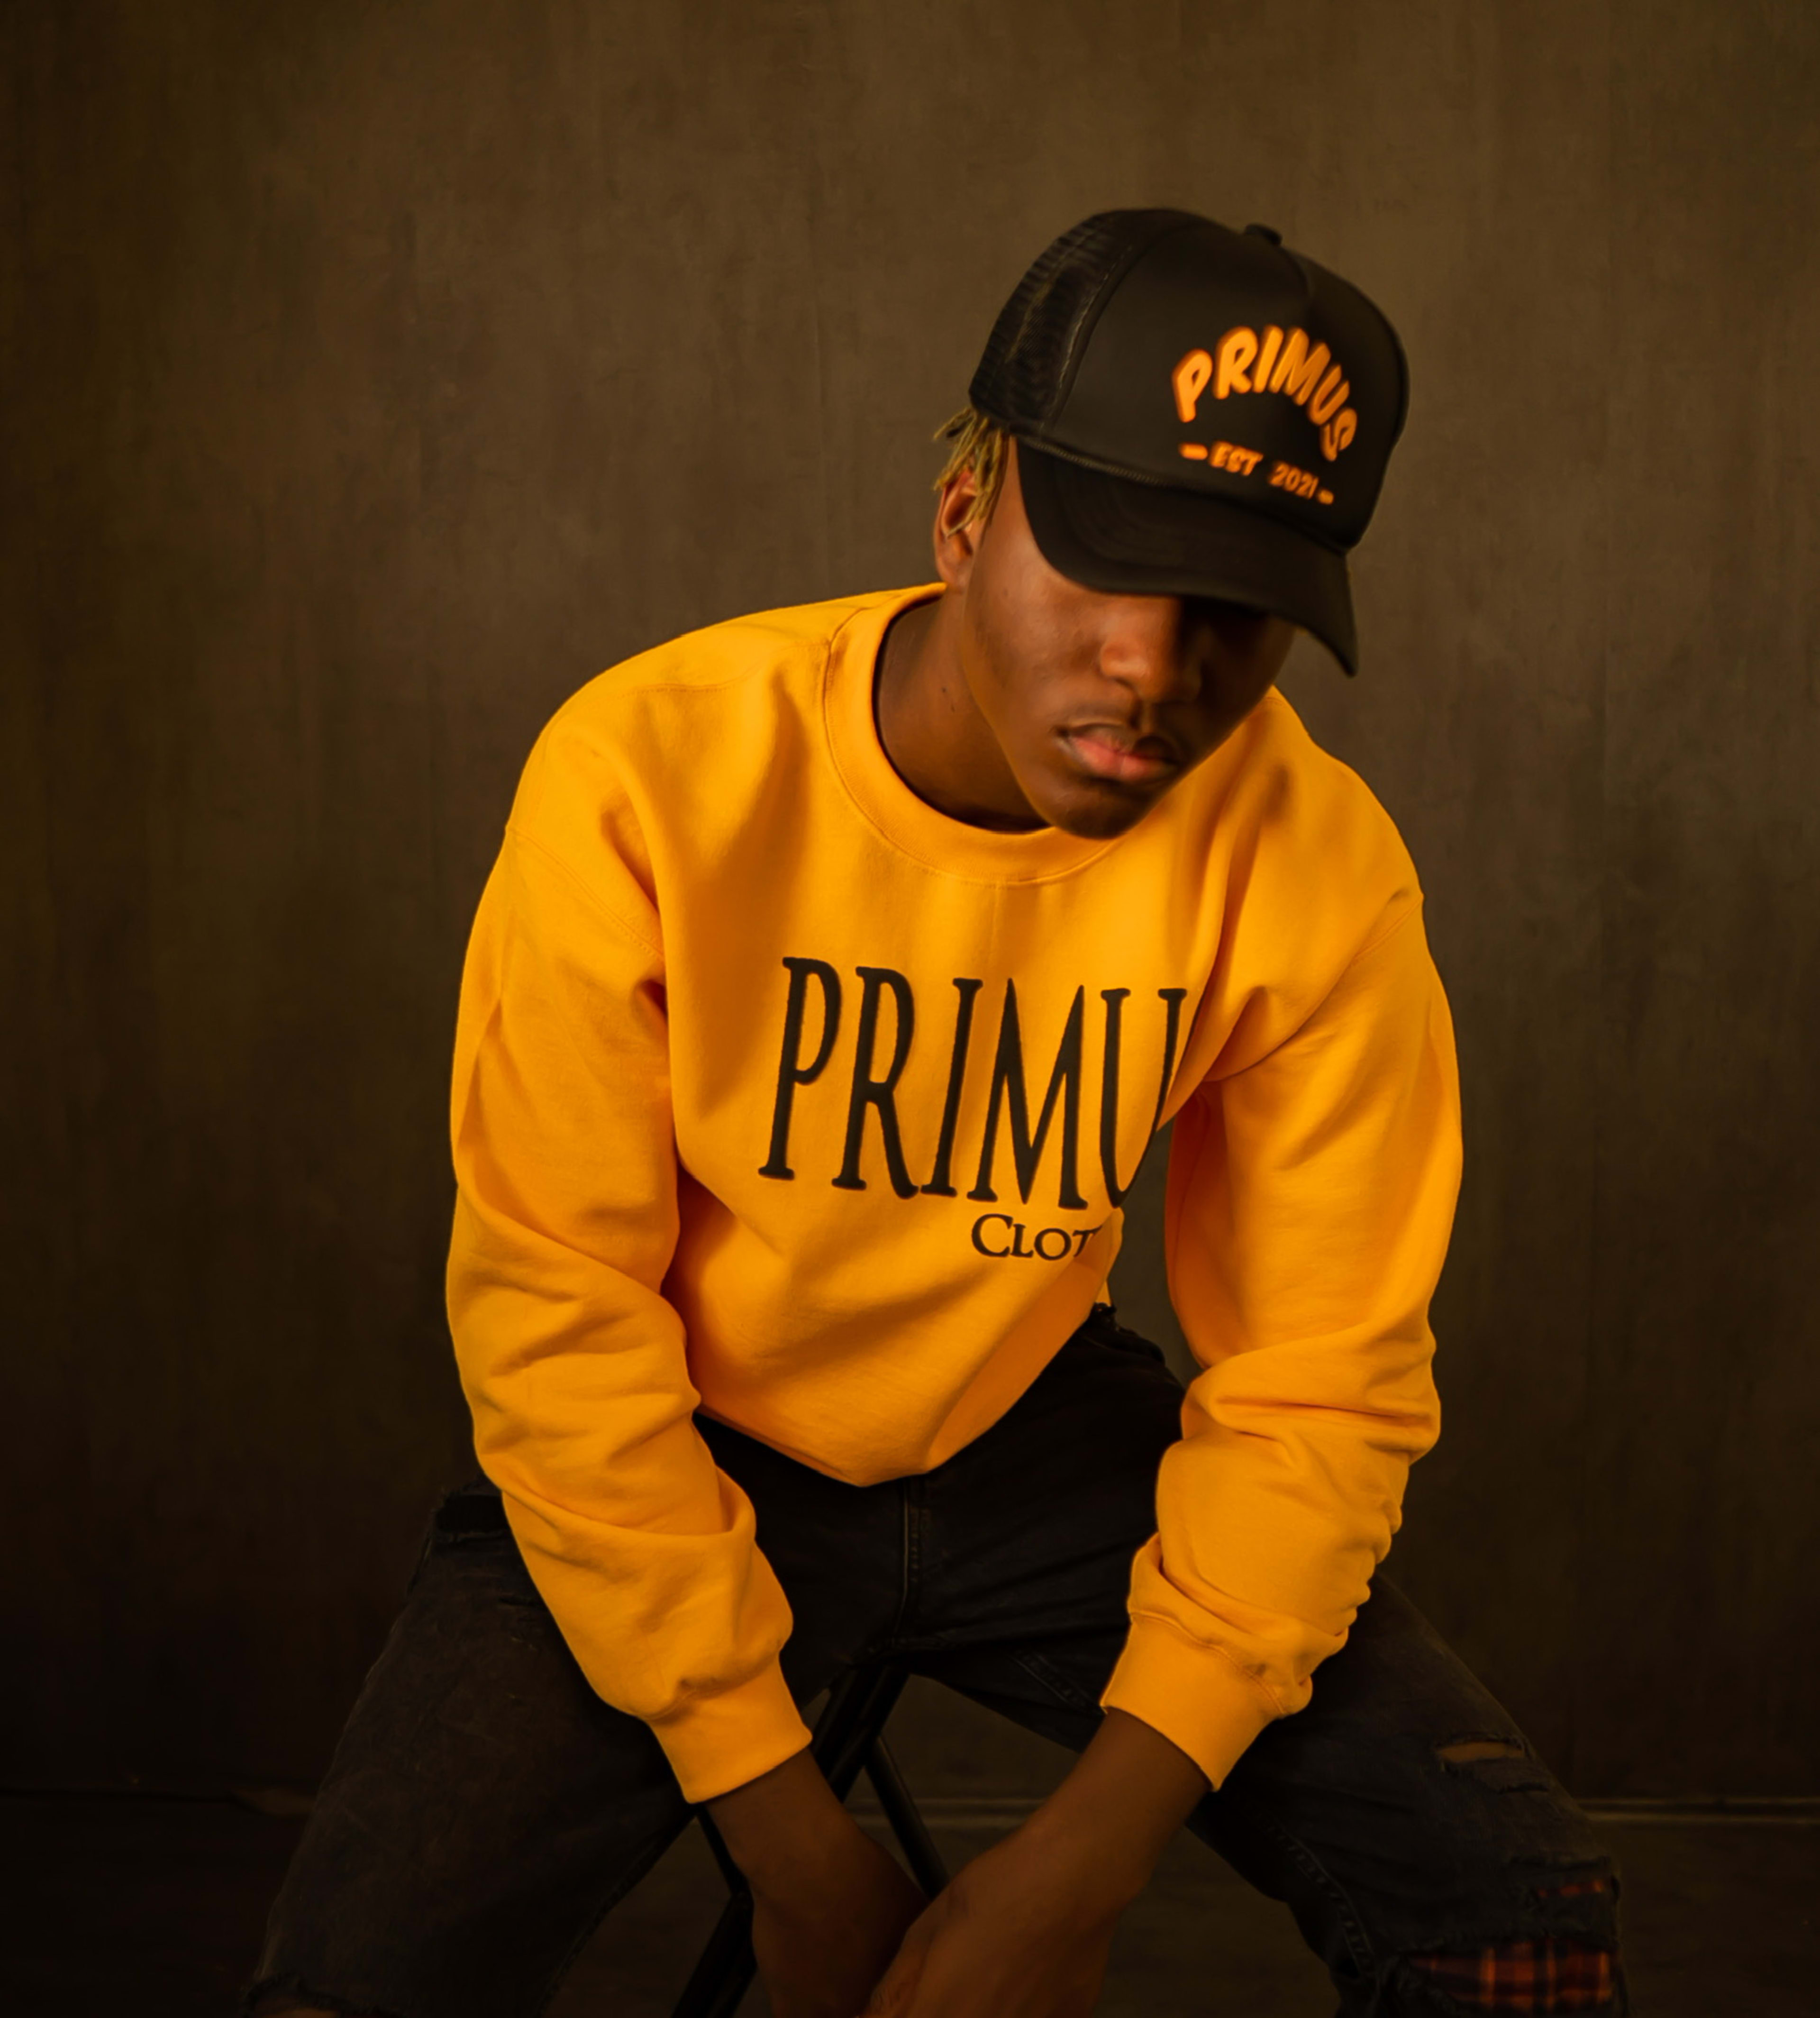 A man in a yellow sweatshirt posing for a photoshoot wearing a black hat.